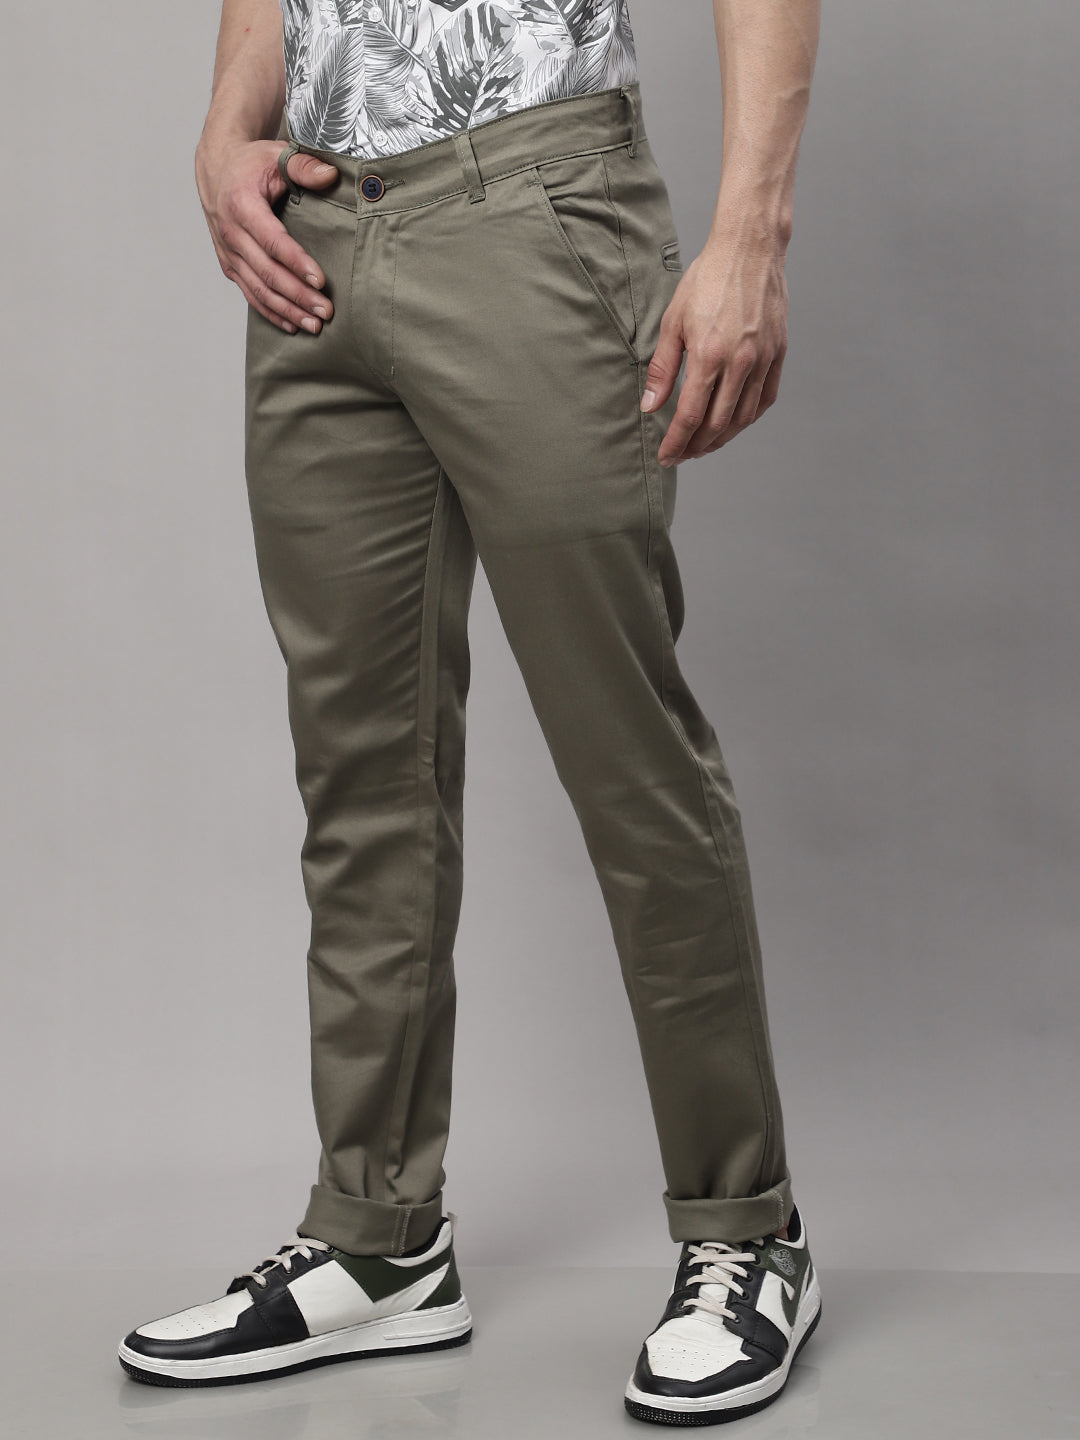 Majestic Man Regular Fit Satin Finish Cotton Casual Solid Chinos Trouser - Olive